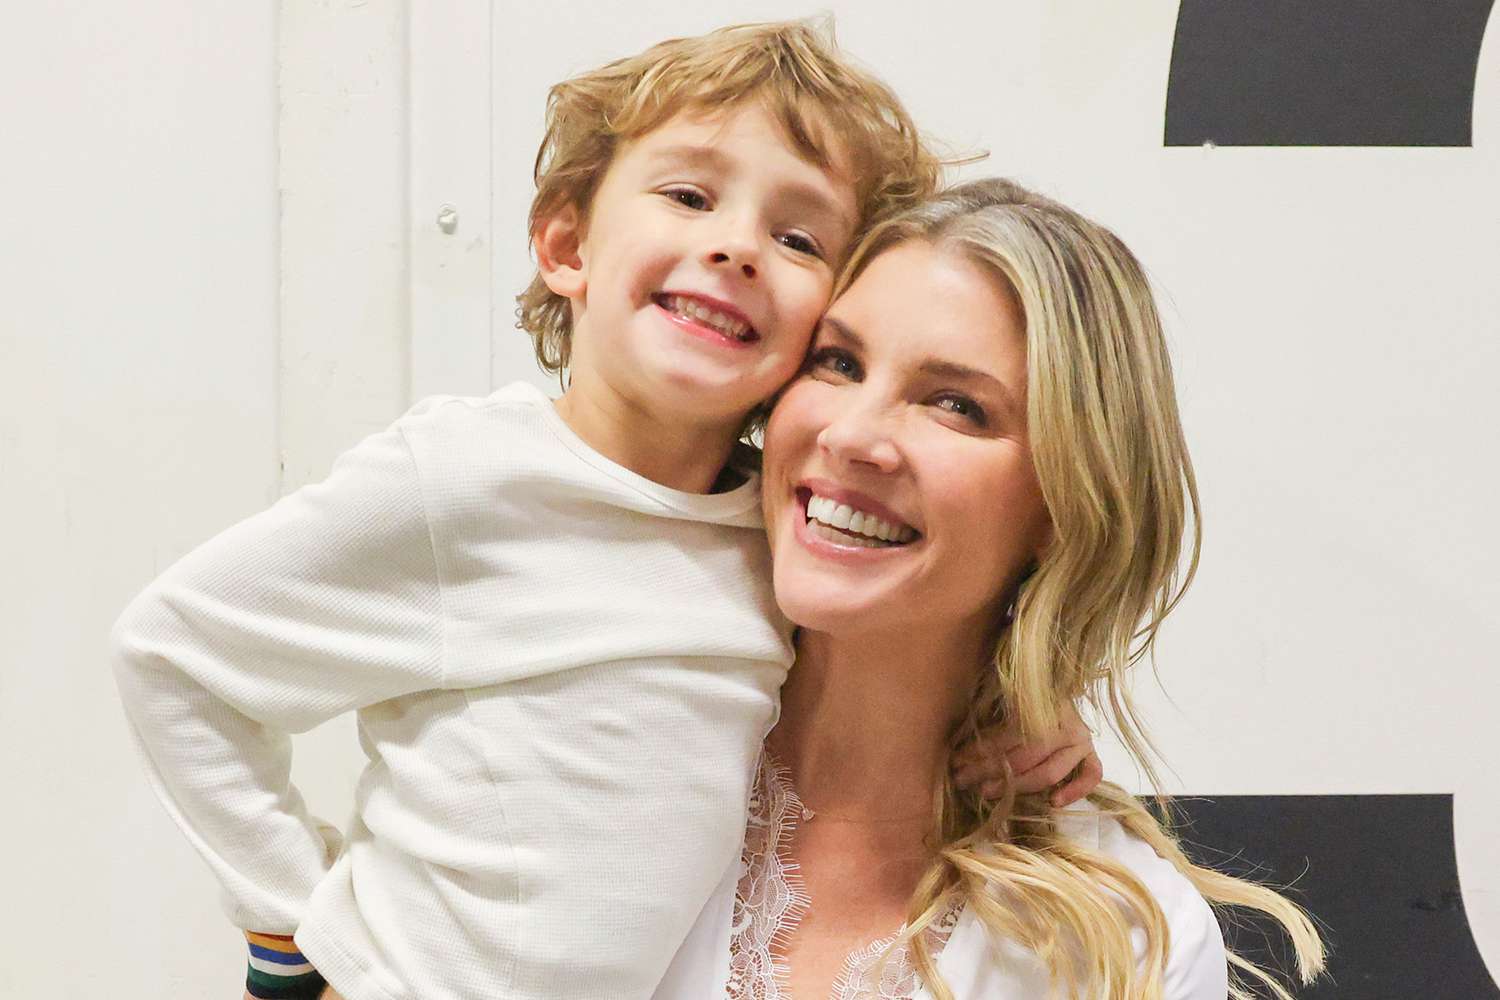 Amanda Kloots ‘Treats My Babysitters Well’ to Keep Son Elvis Safe and Happy [Video]